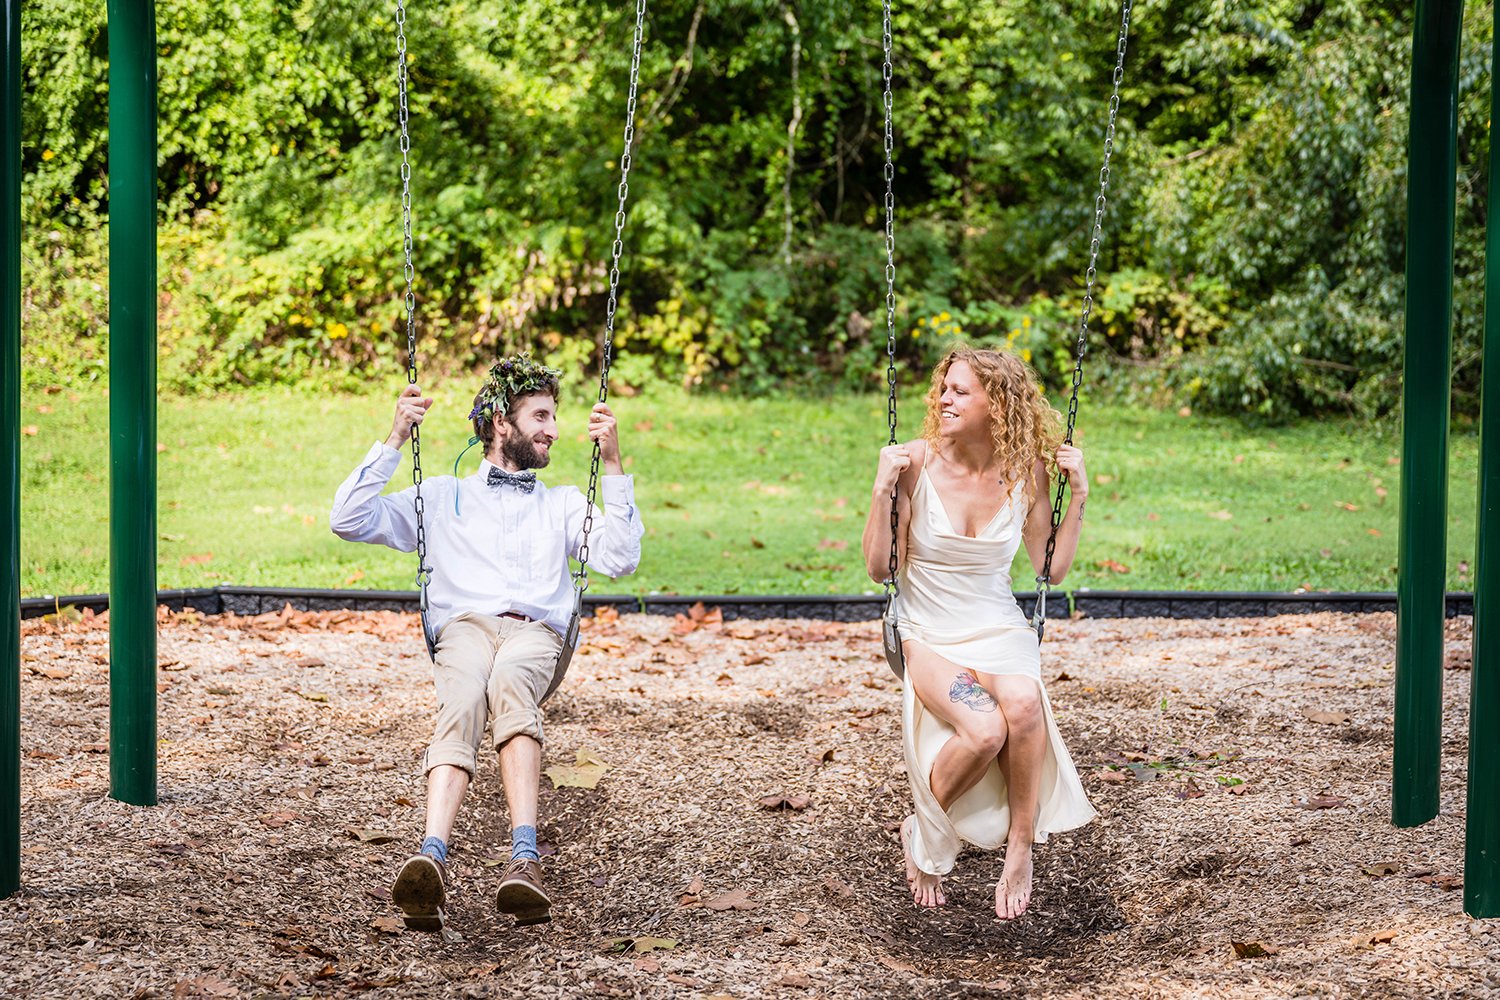 A couple swings together in a playground at Fishburn Park during their elopement.